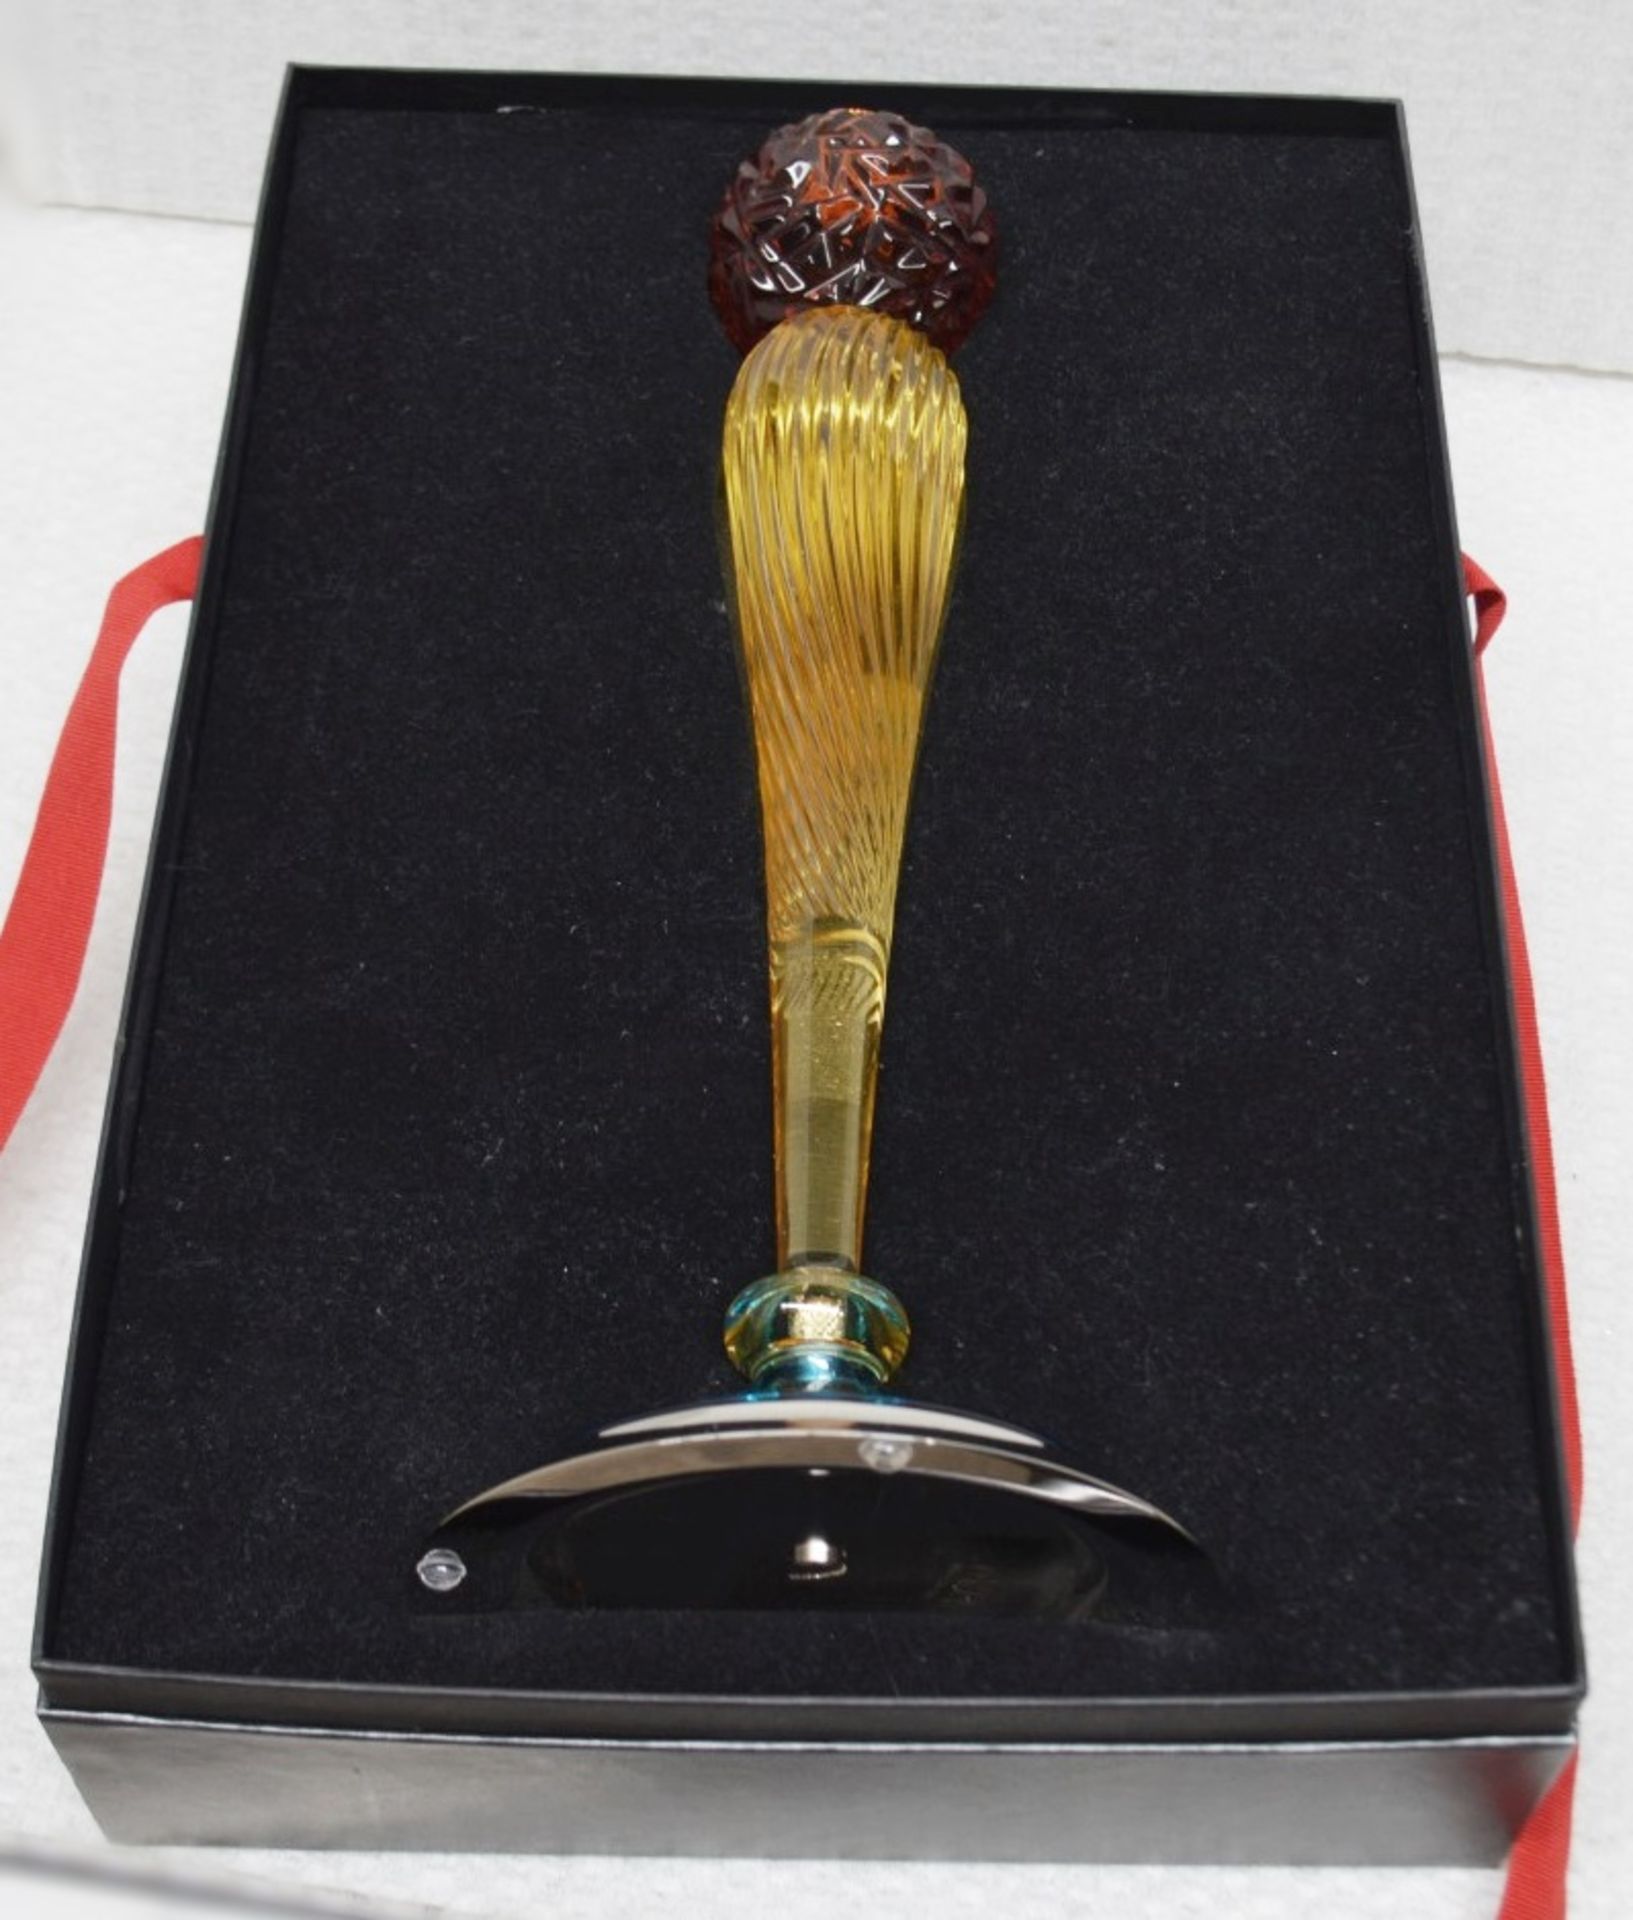 1 x BALDI 'Home Jewels' Italian Hand-crafted Artisan 'Sphere' Candle Stick *Original RRP £2.355.00* - Image 2 of 3